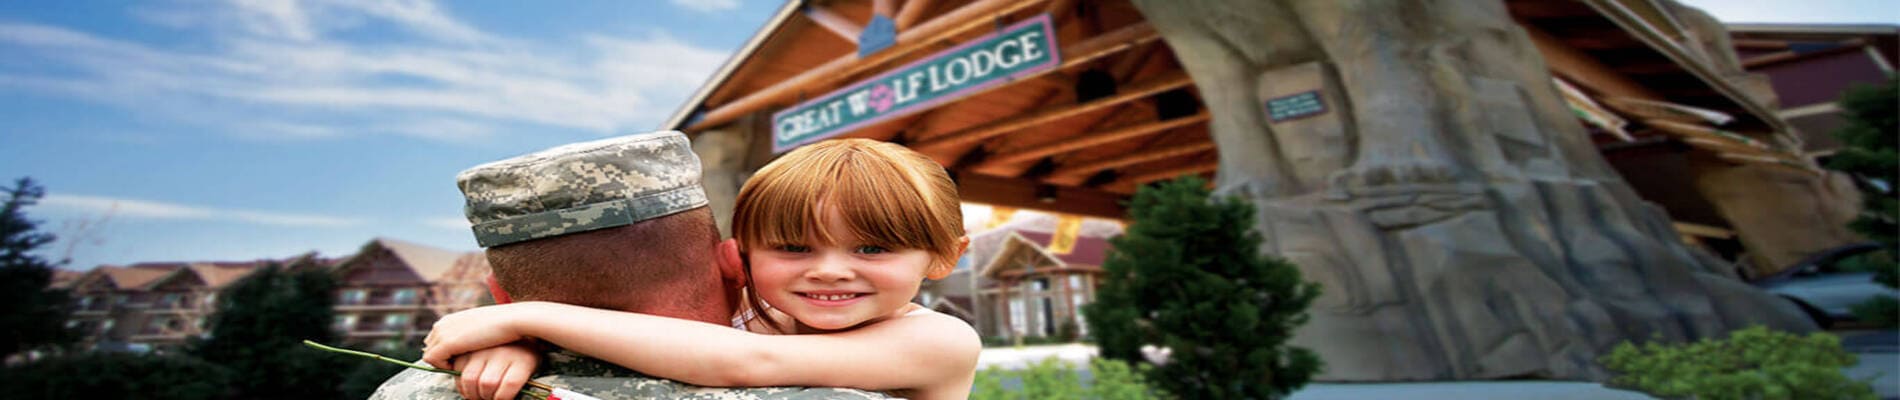 A girl smiles at the camera as her military father carries her toward a Great Wolf Lodge indoor water park and resort.